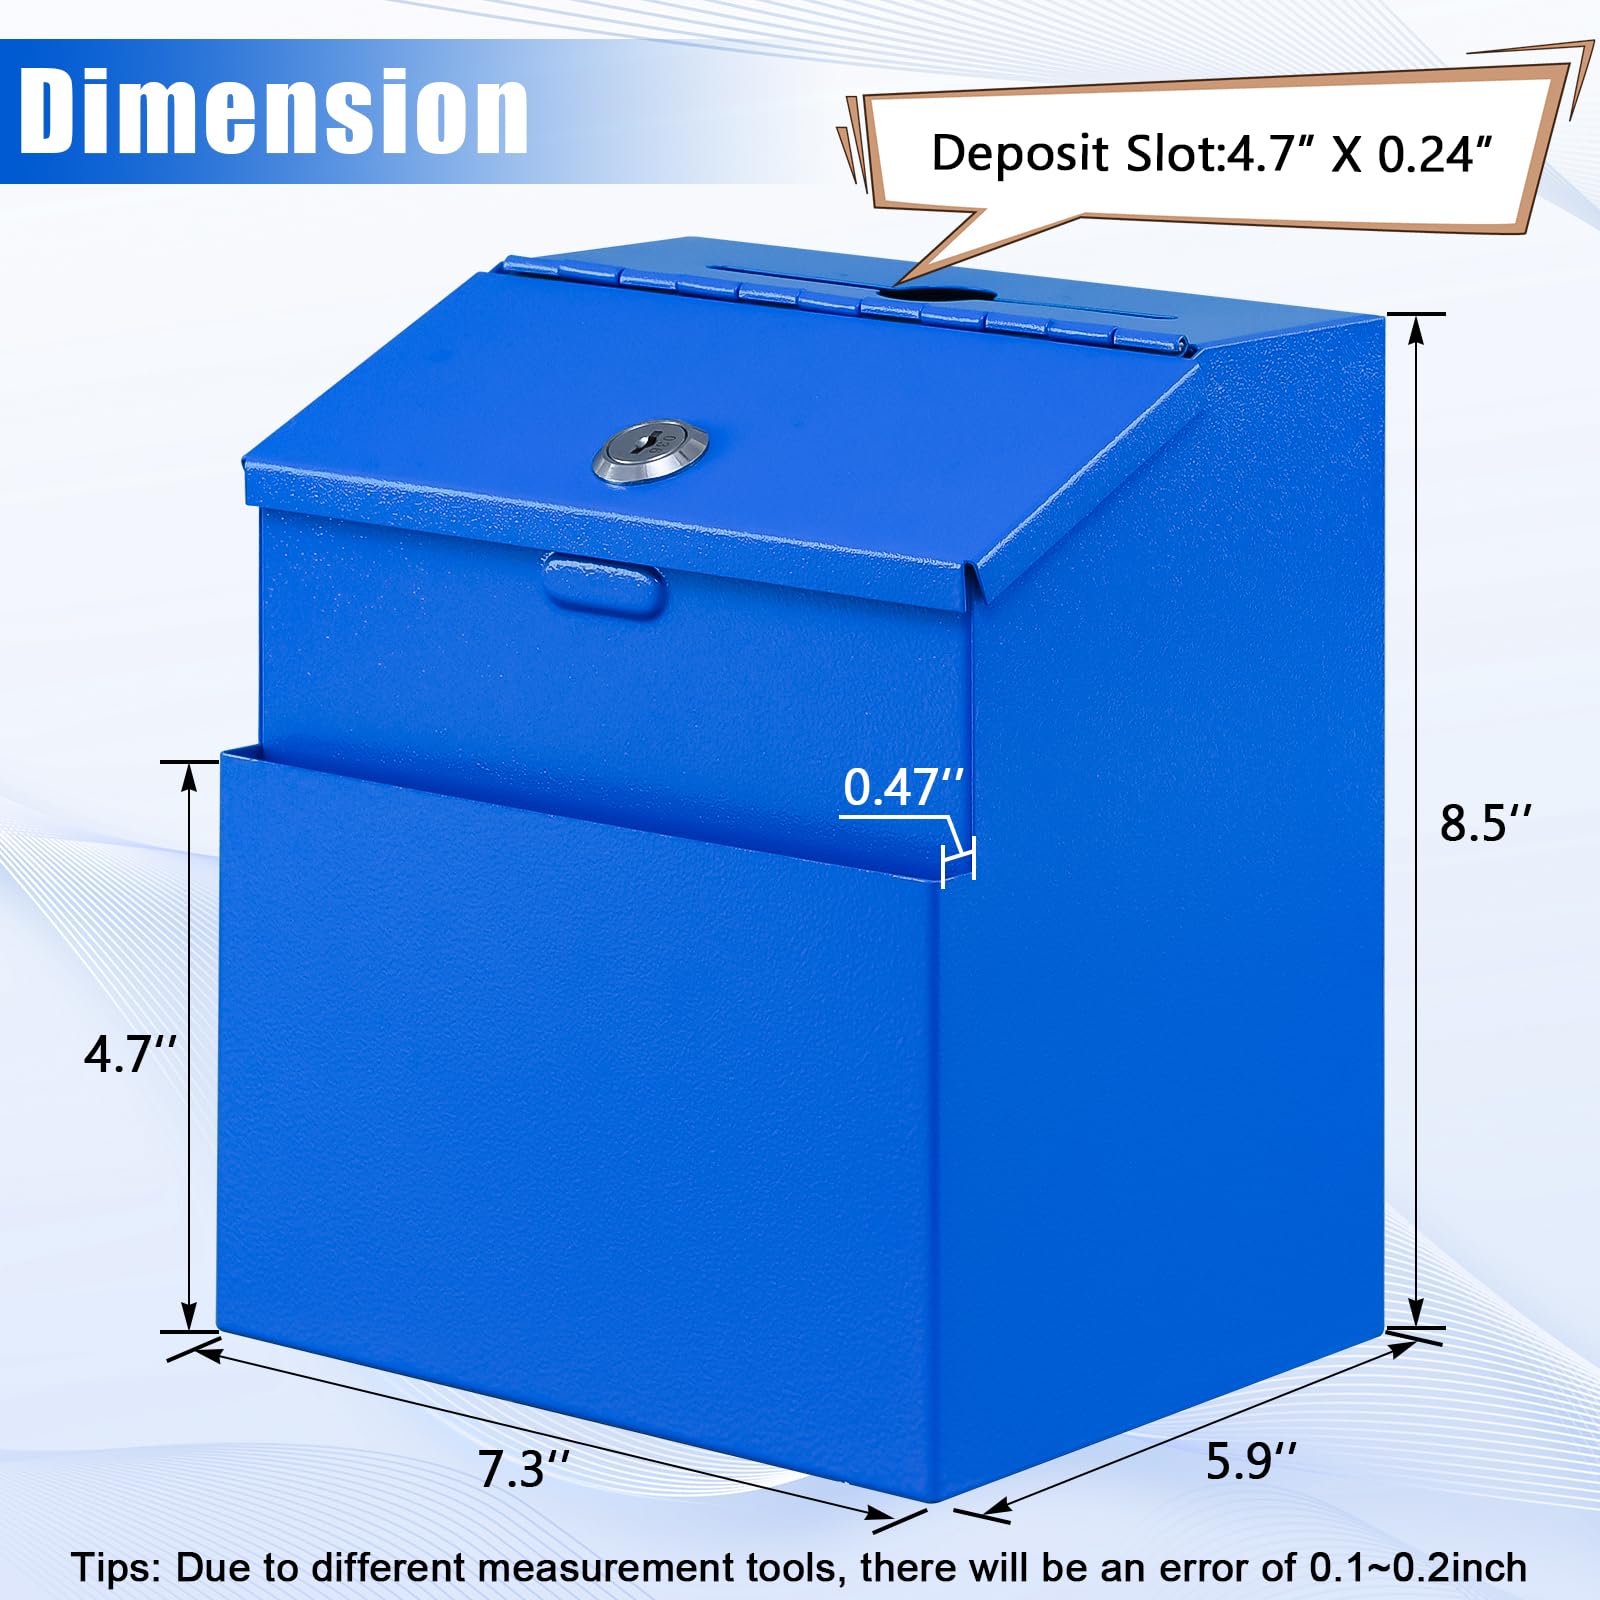 KYODOLED Suggestion Box with Lock and 50 Free Suggestion Cards, Metal Wall Mounted Ballot Box, Donation and Collection Key Drop Box with Slot & 2 Keys, 8.5H x 5.9W x 7.3L Inch, Blue